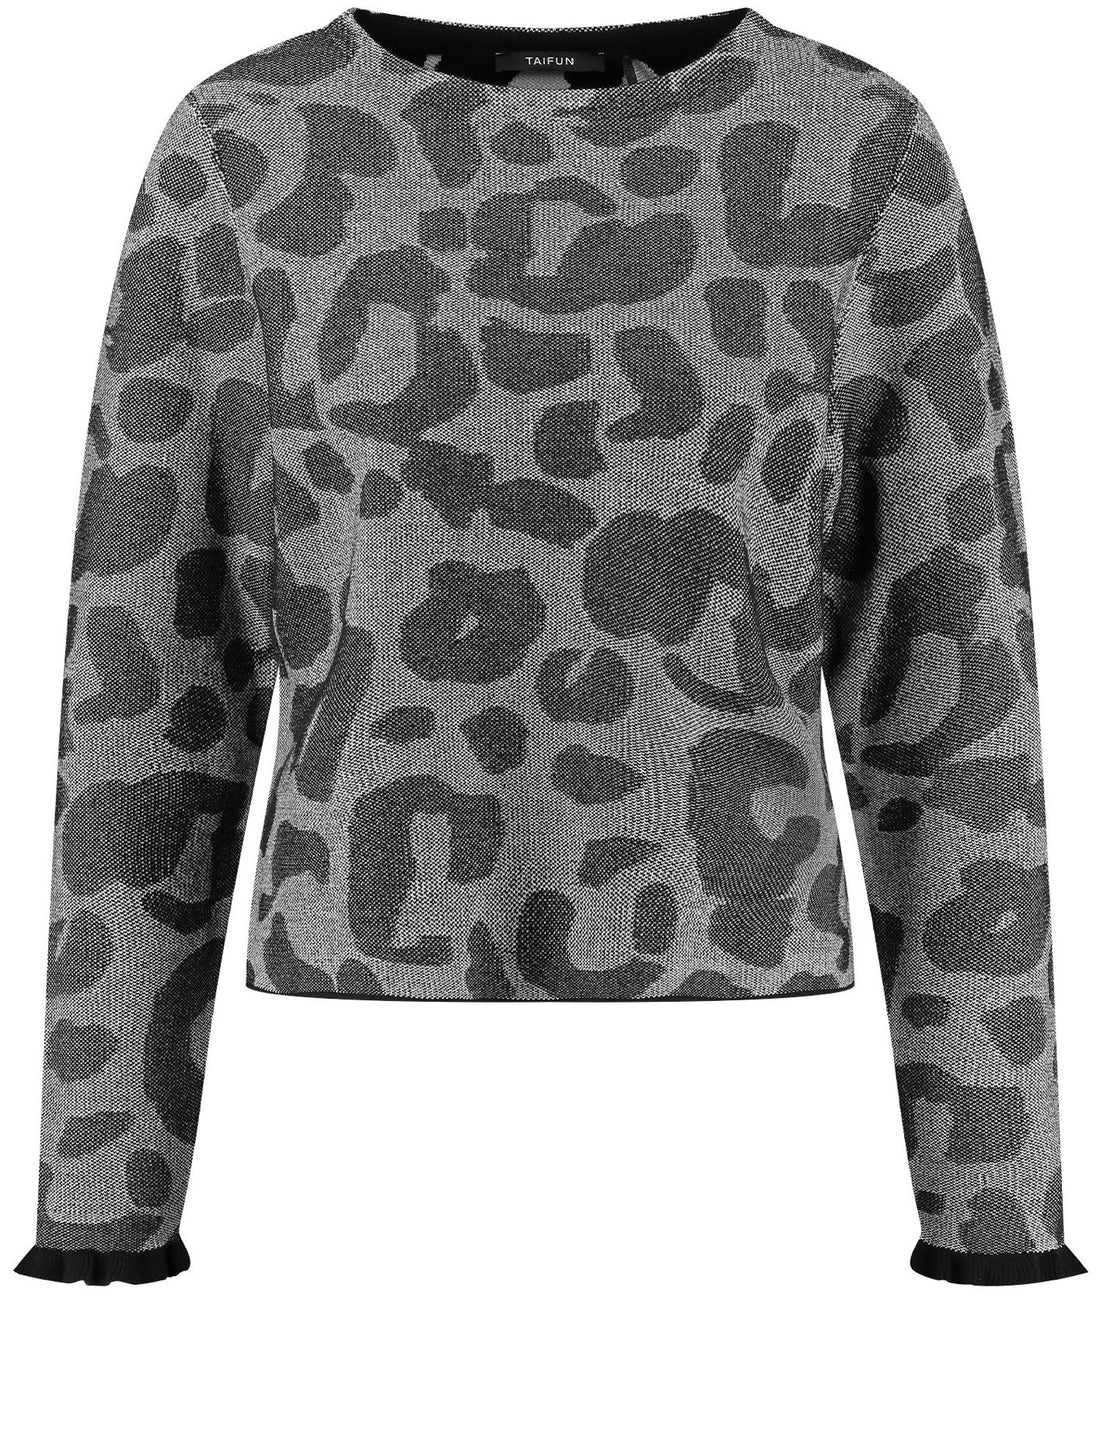 Jumper With A Leopard Pattern_472404-15305_2202_02